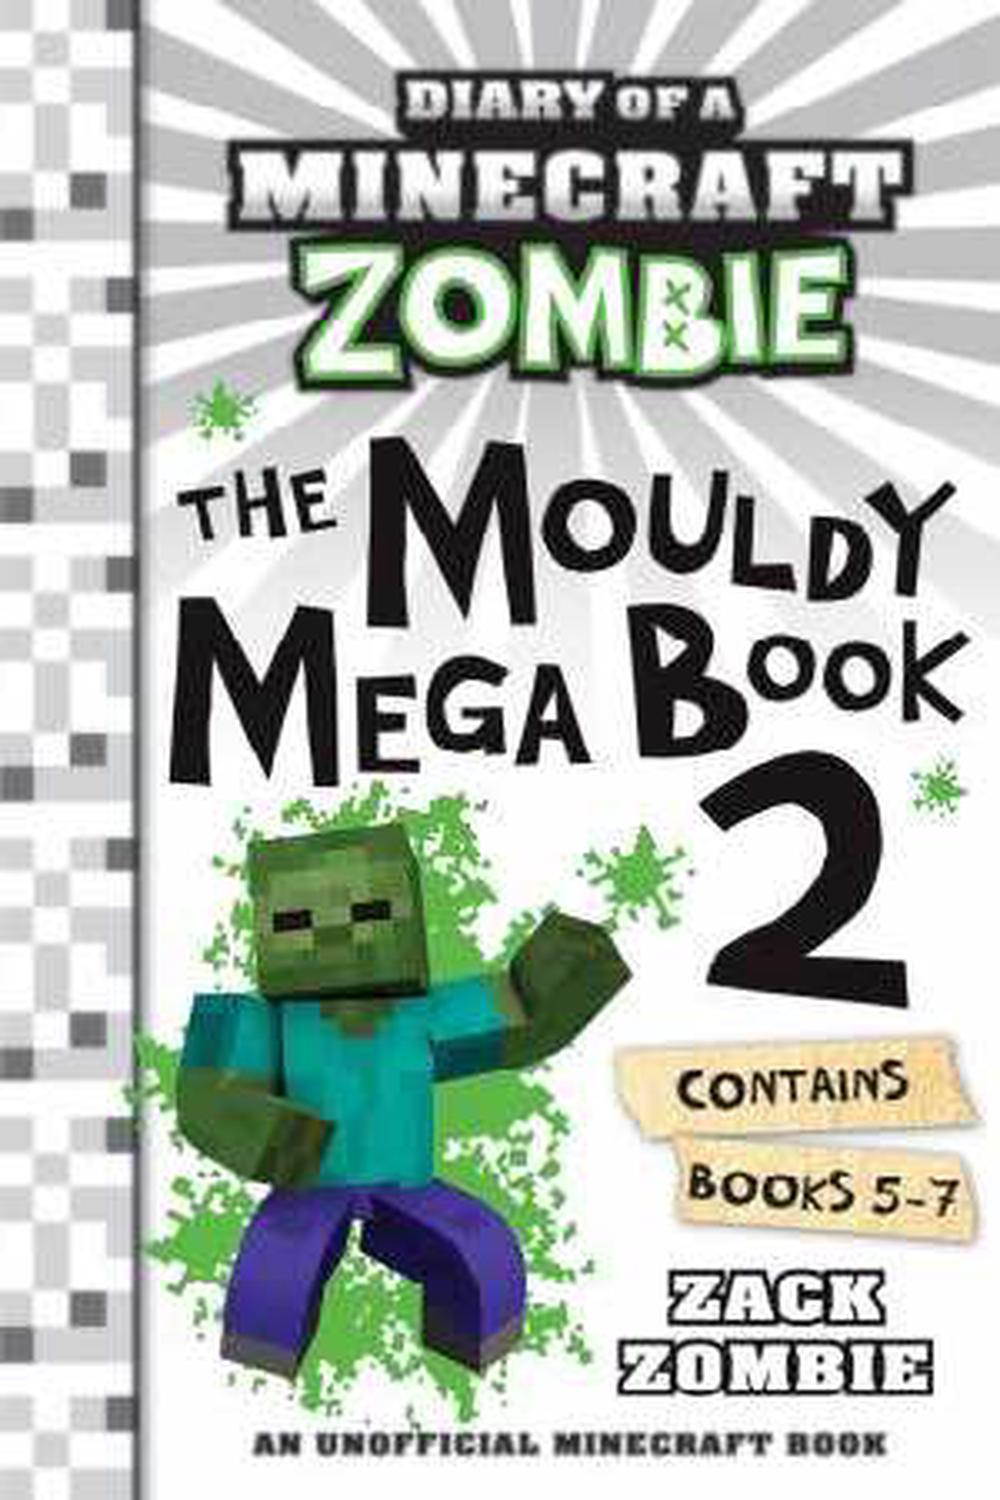 Diary of a Minecraft Zombie The Mouldy Mega Book 2 by Zack Zombie